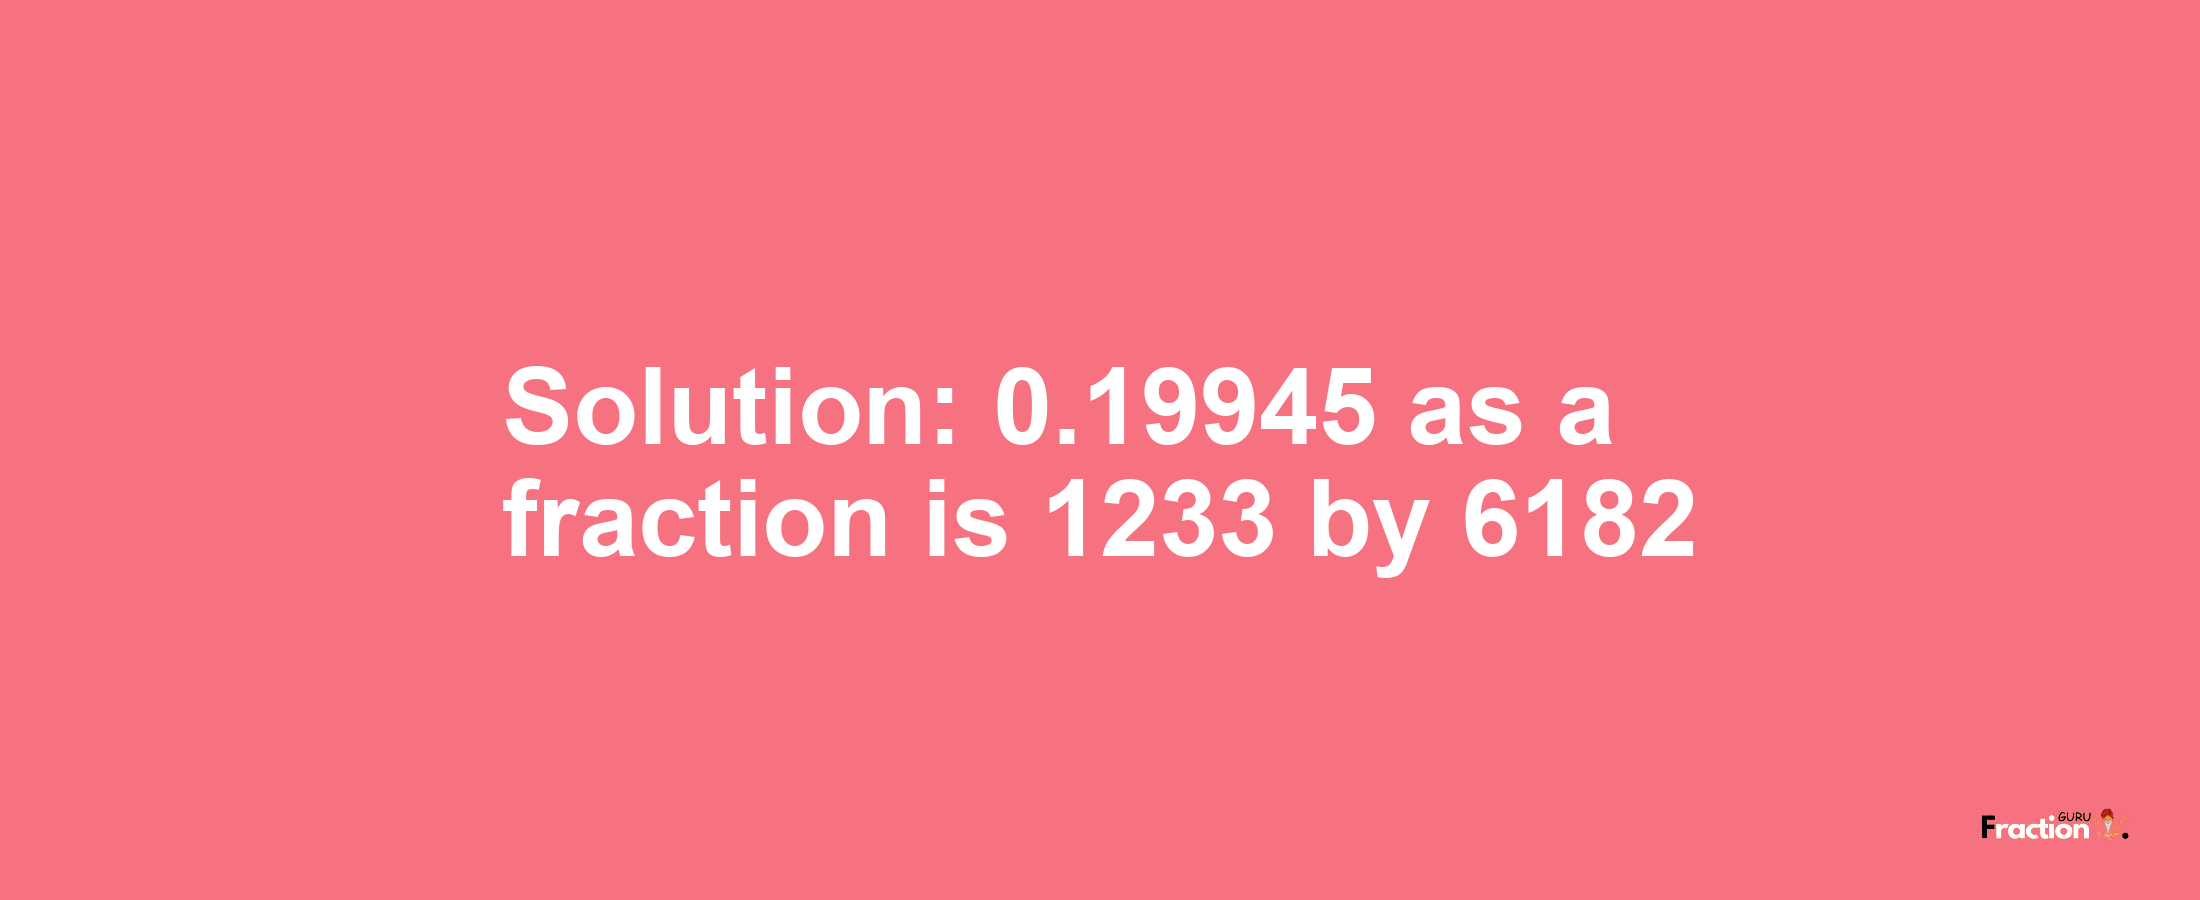 Solution:0.19945 as a fraction is 1233/6182